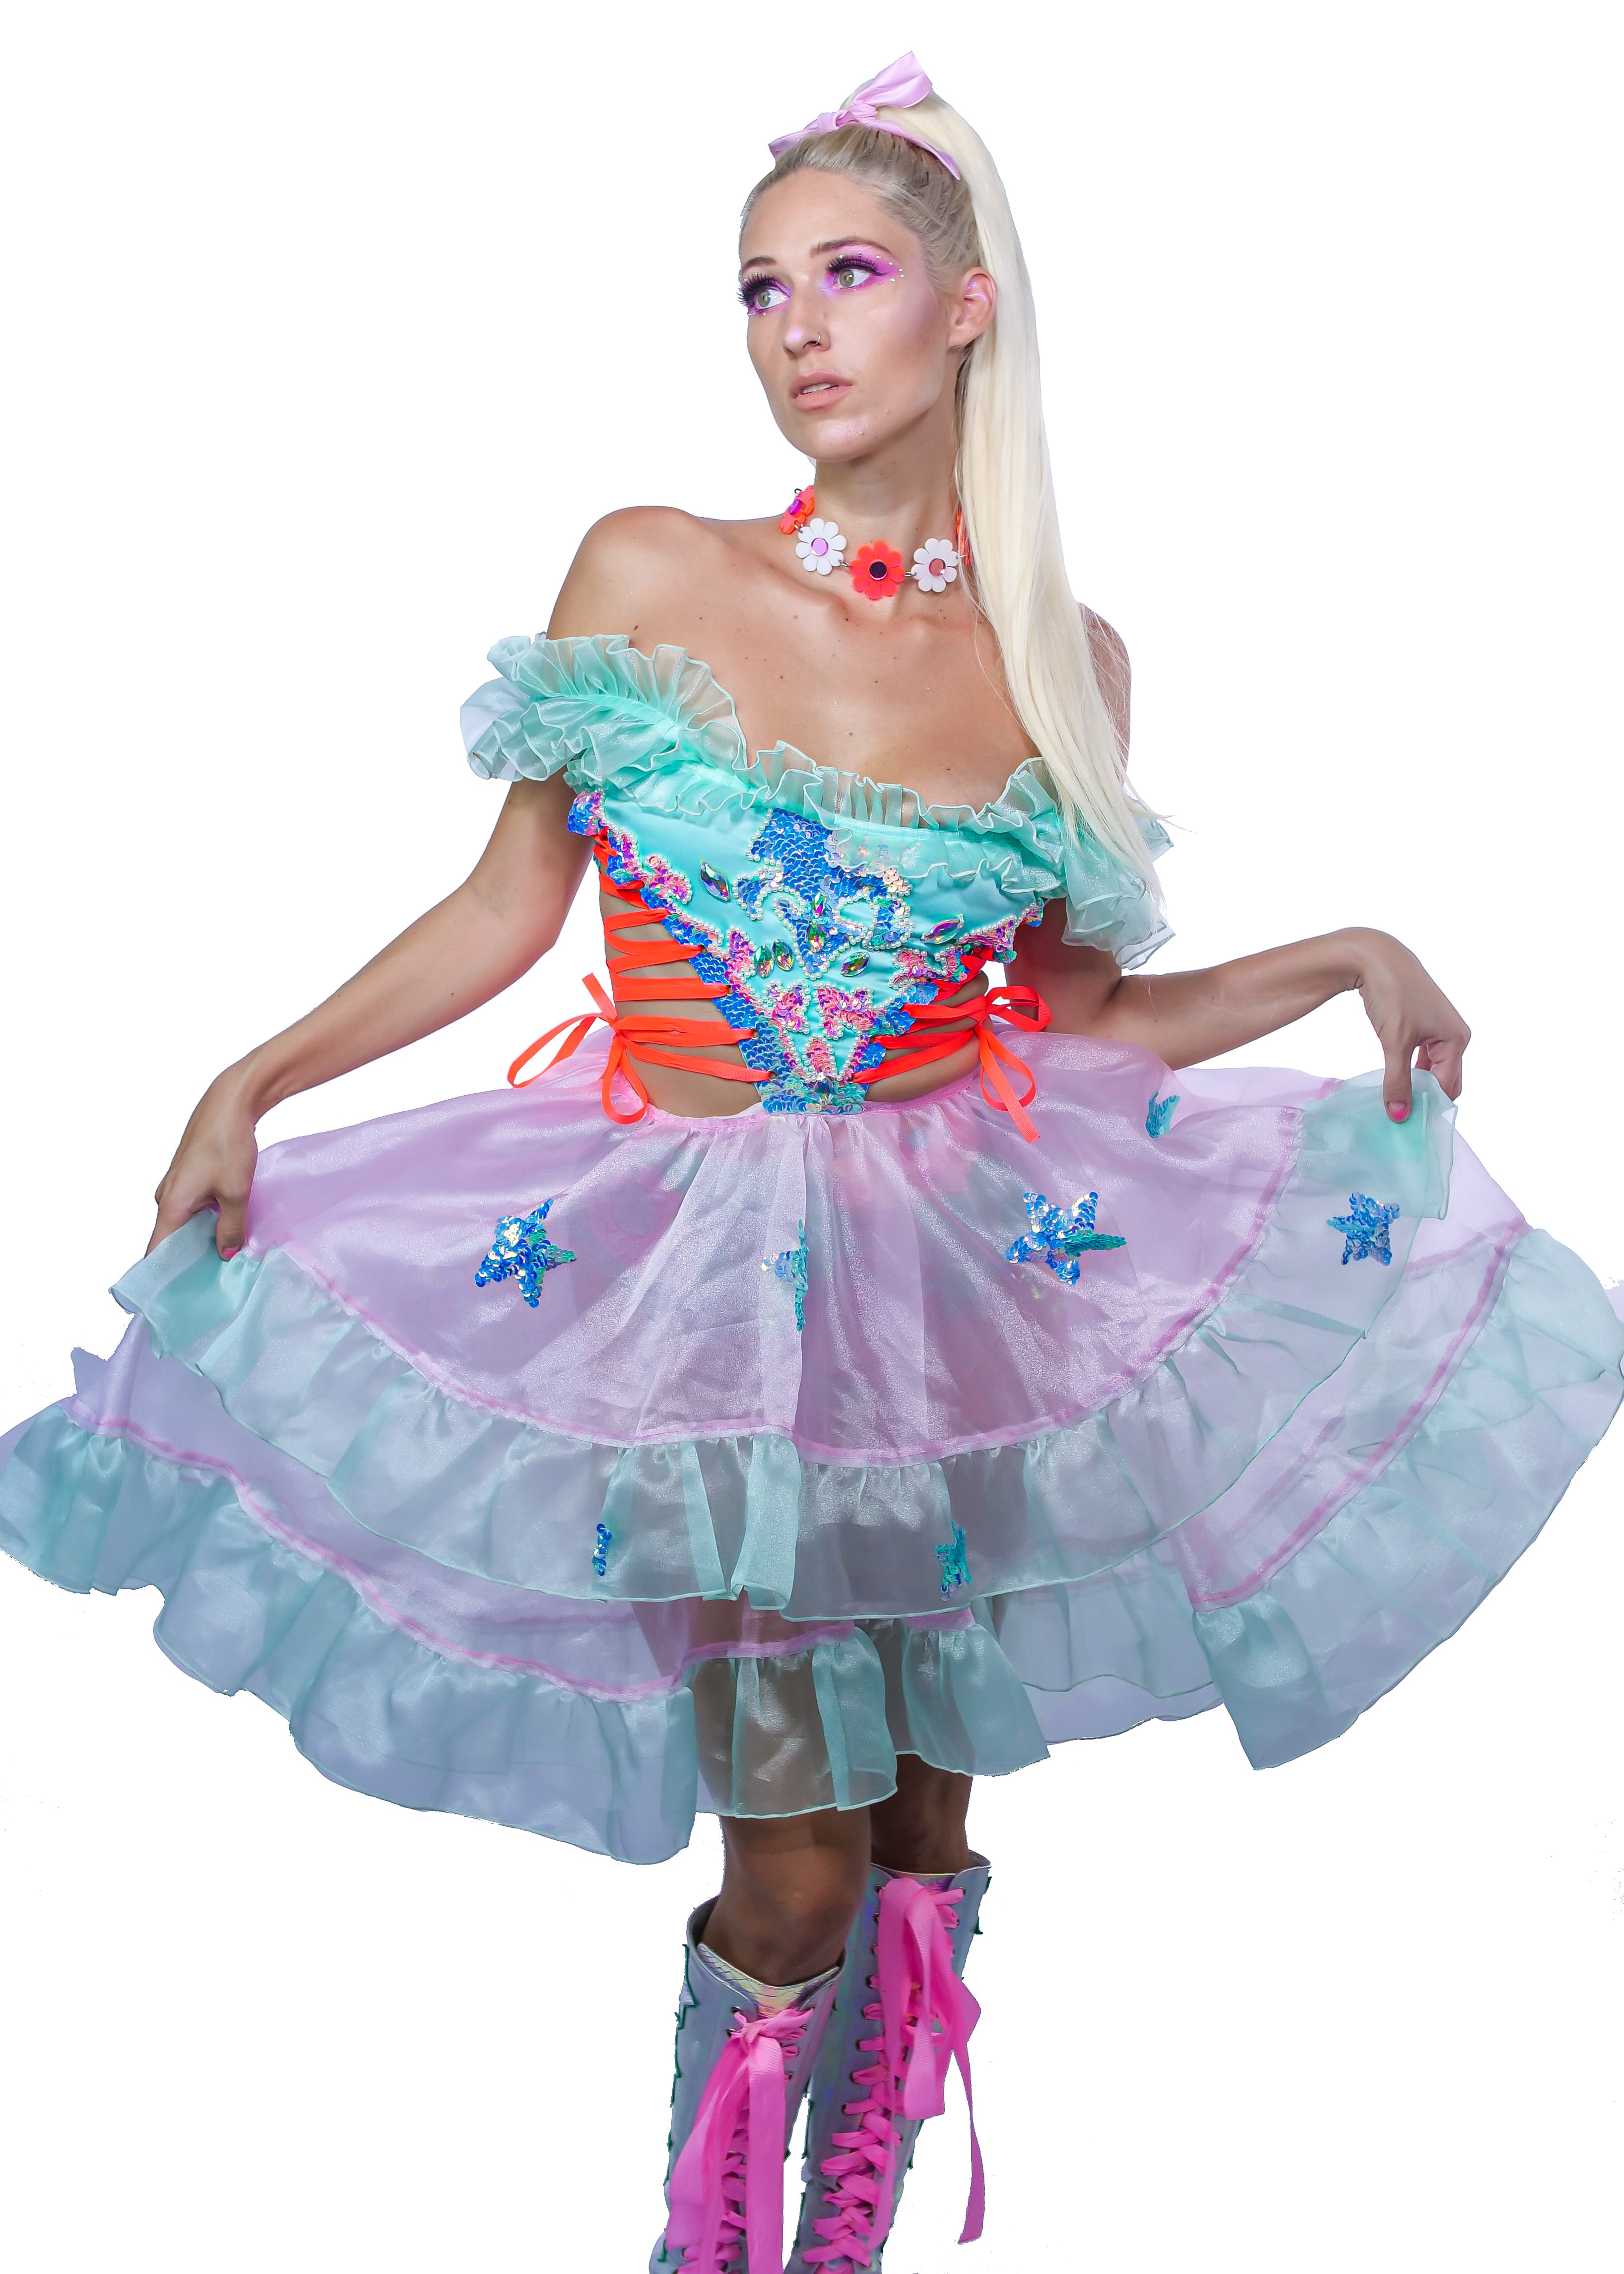 The Rodeo Rosie Princess Dress